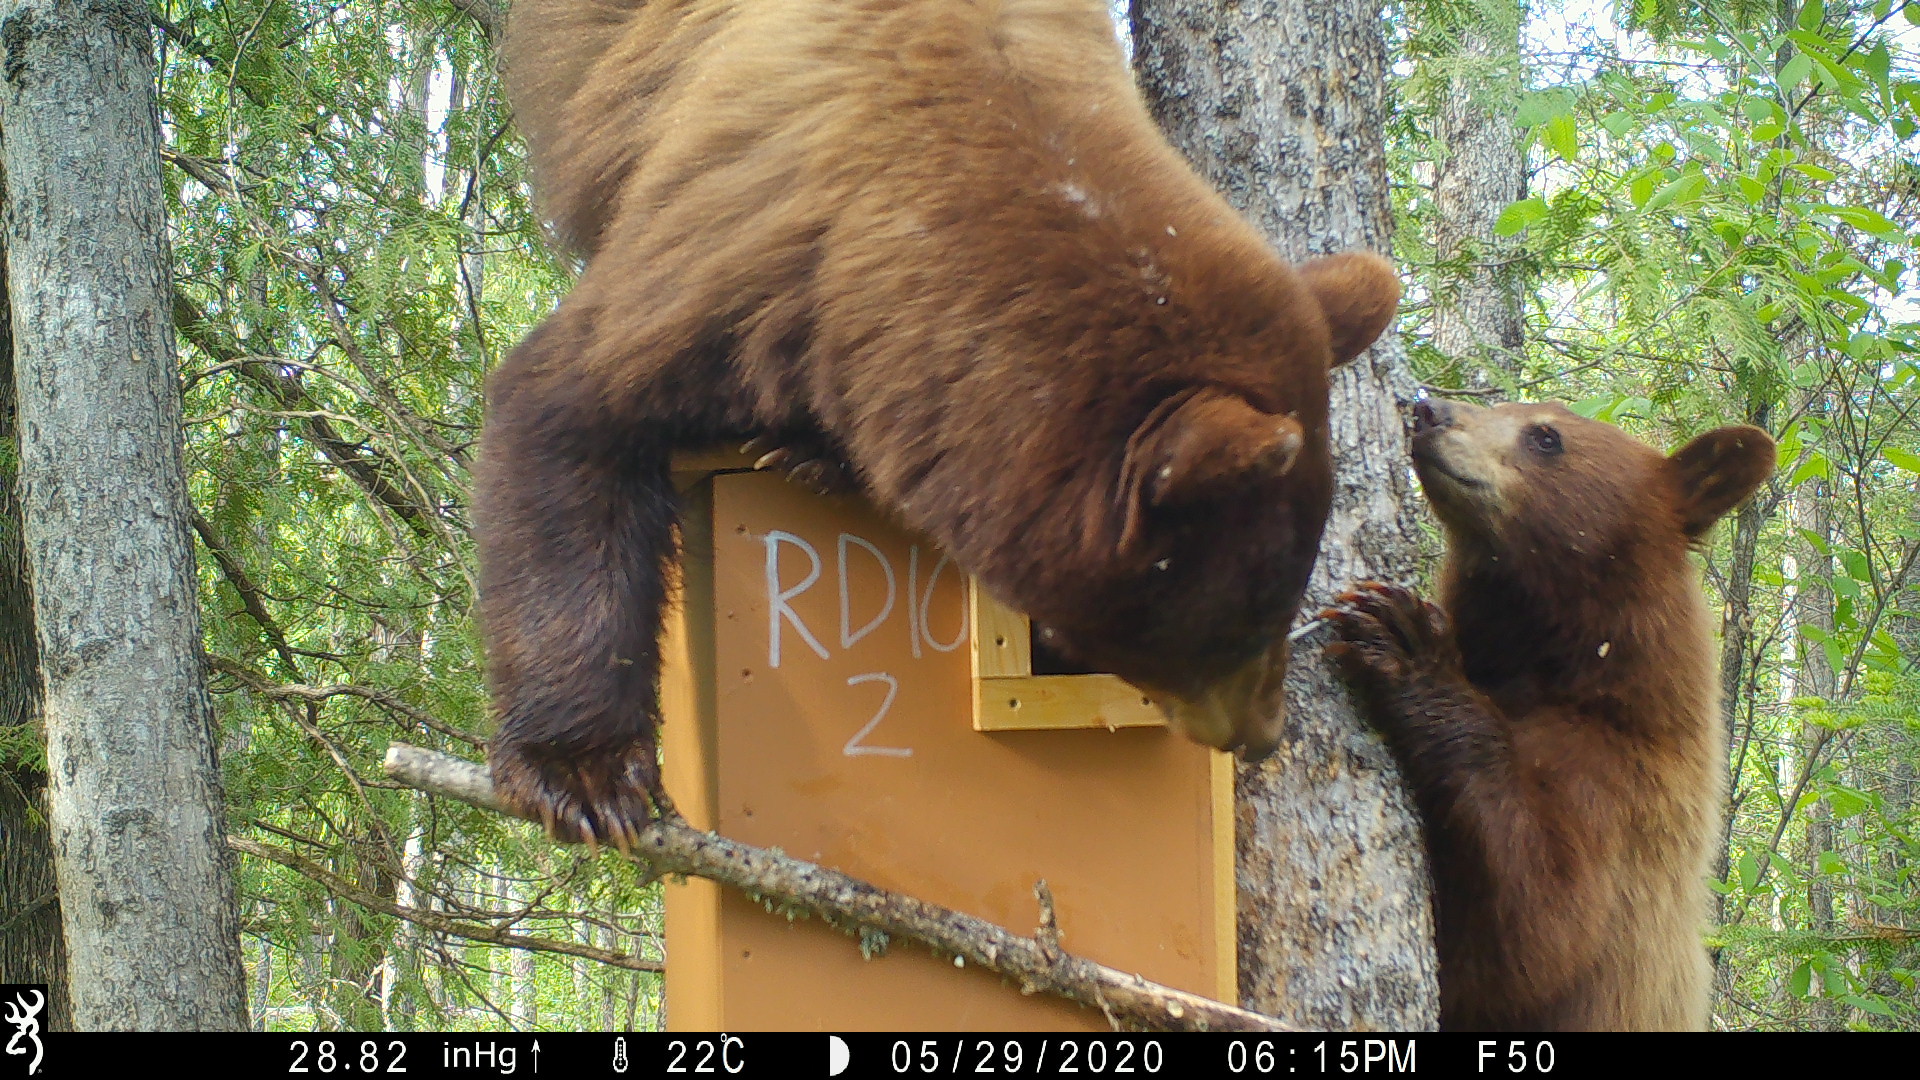 Two bears climb on a wooden box attached to a tree